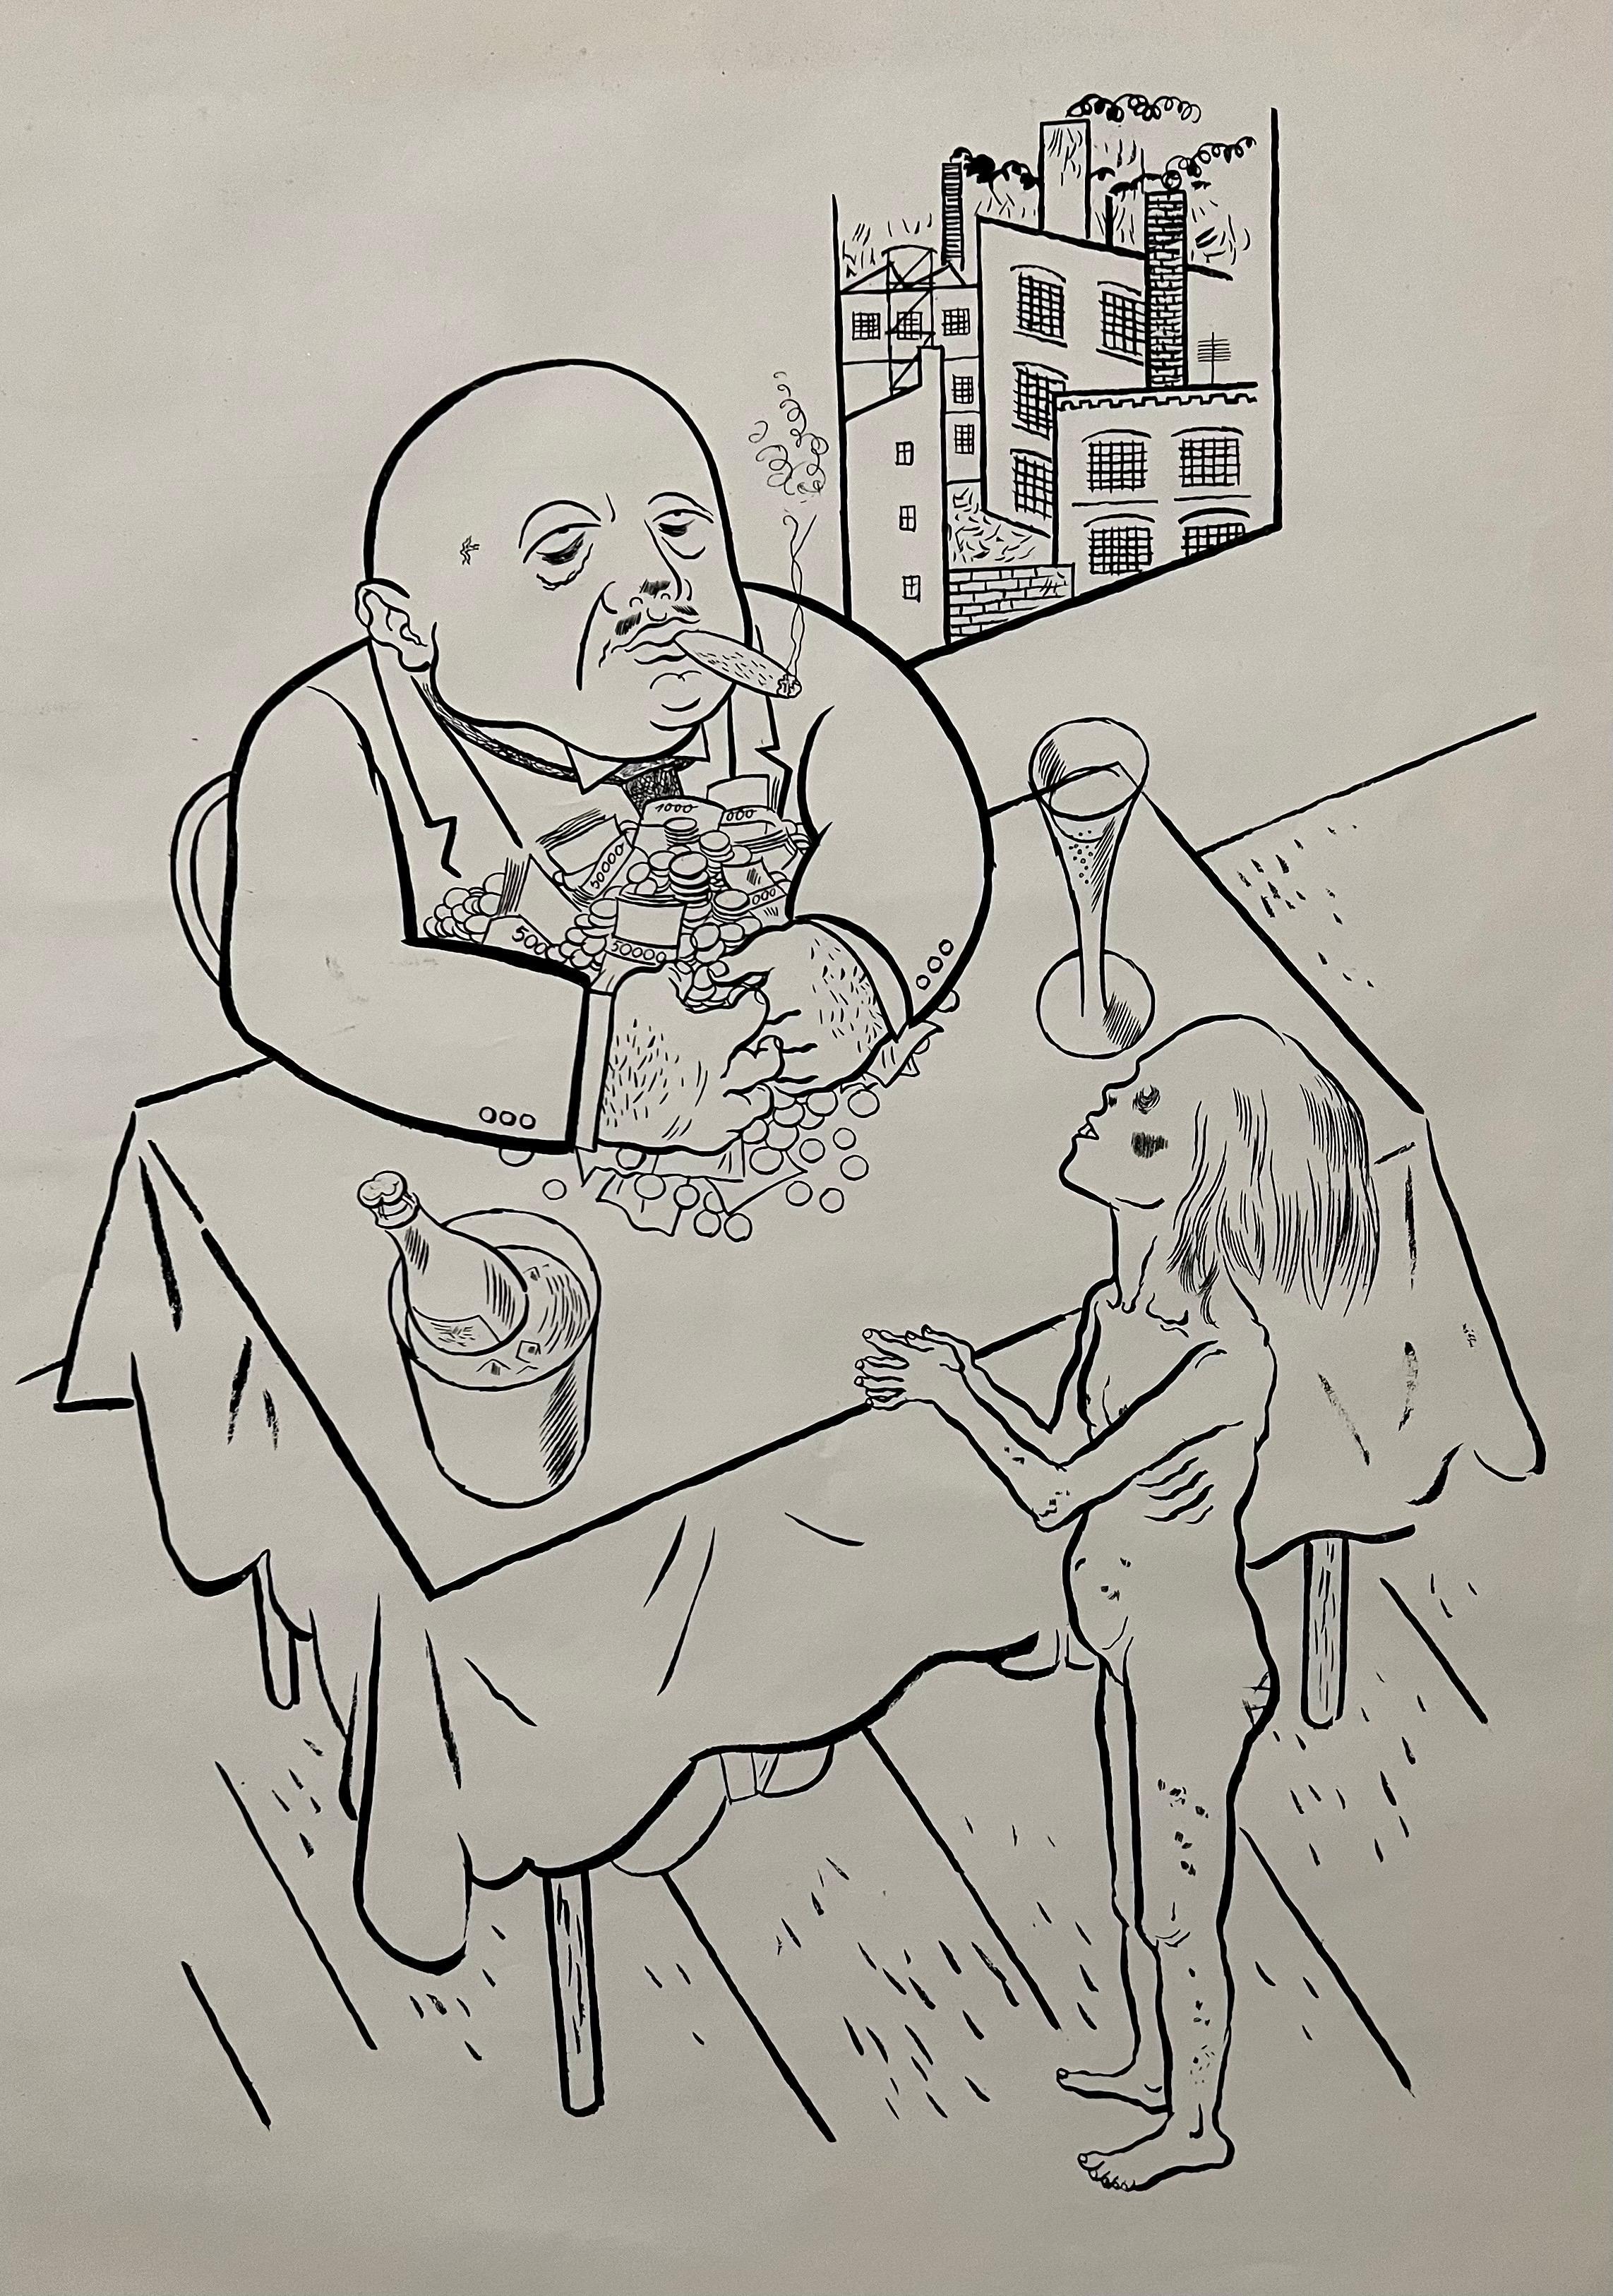 From The robbers. lithographs by George Grosz for the drama of the same name. 
photolithography on laid paper. 19 X 25.5 inches (sheet size).  This is not hand signed or numbered in pecil.
Limited edition. Berlin, Malik-Verlag, 1923. 
Dückers MV,